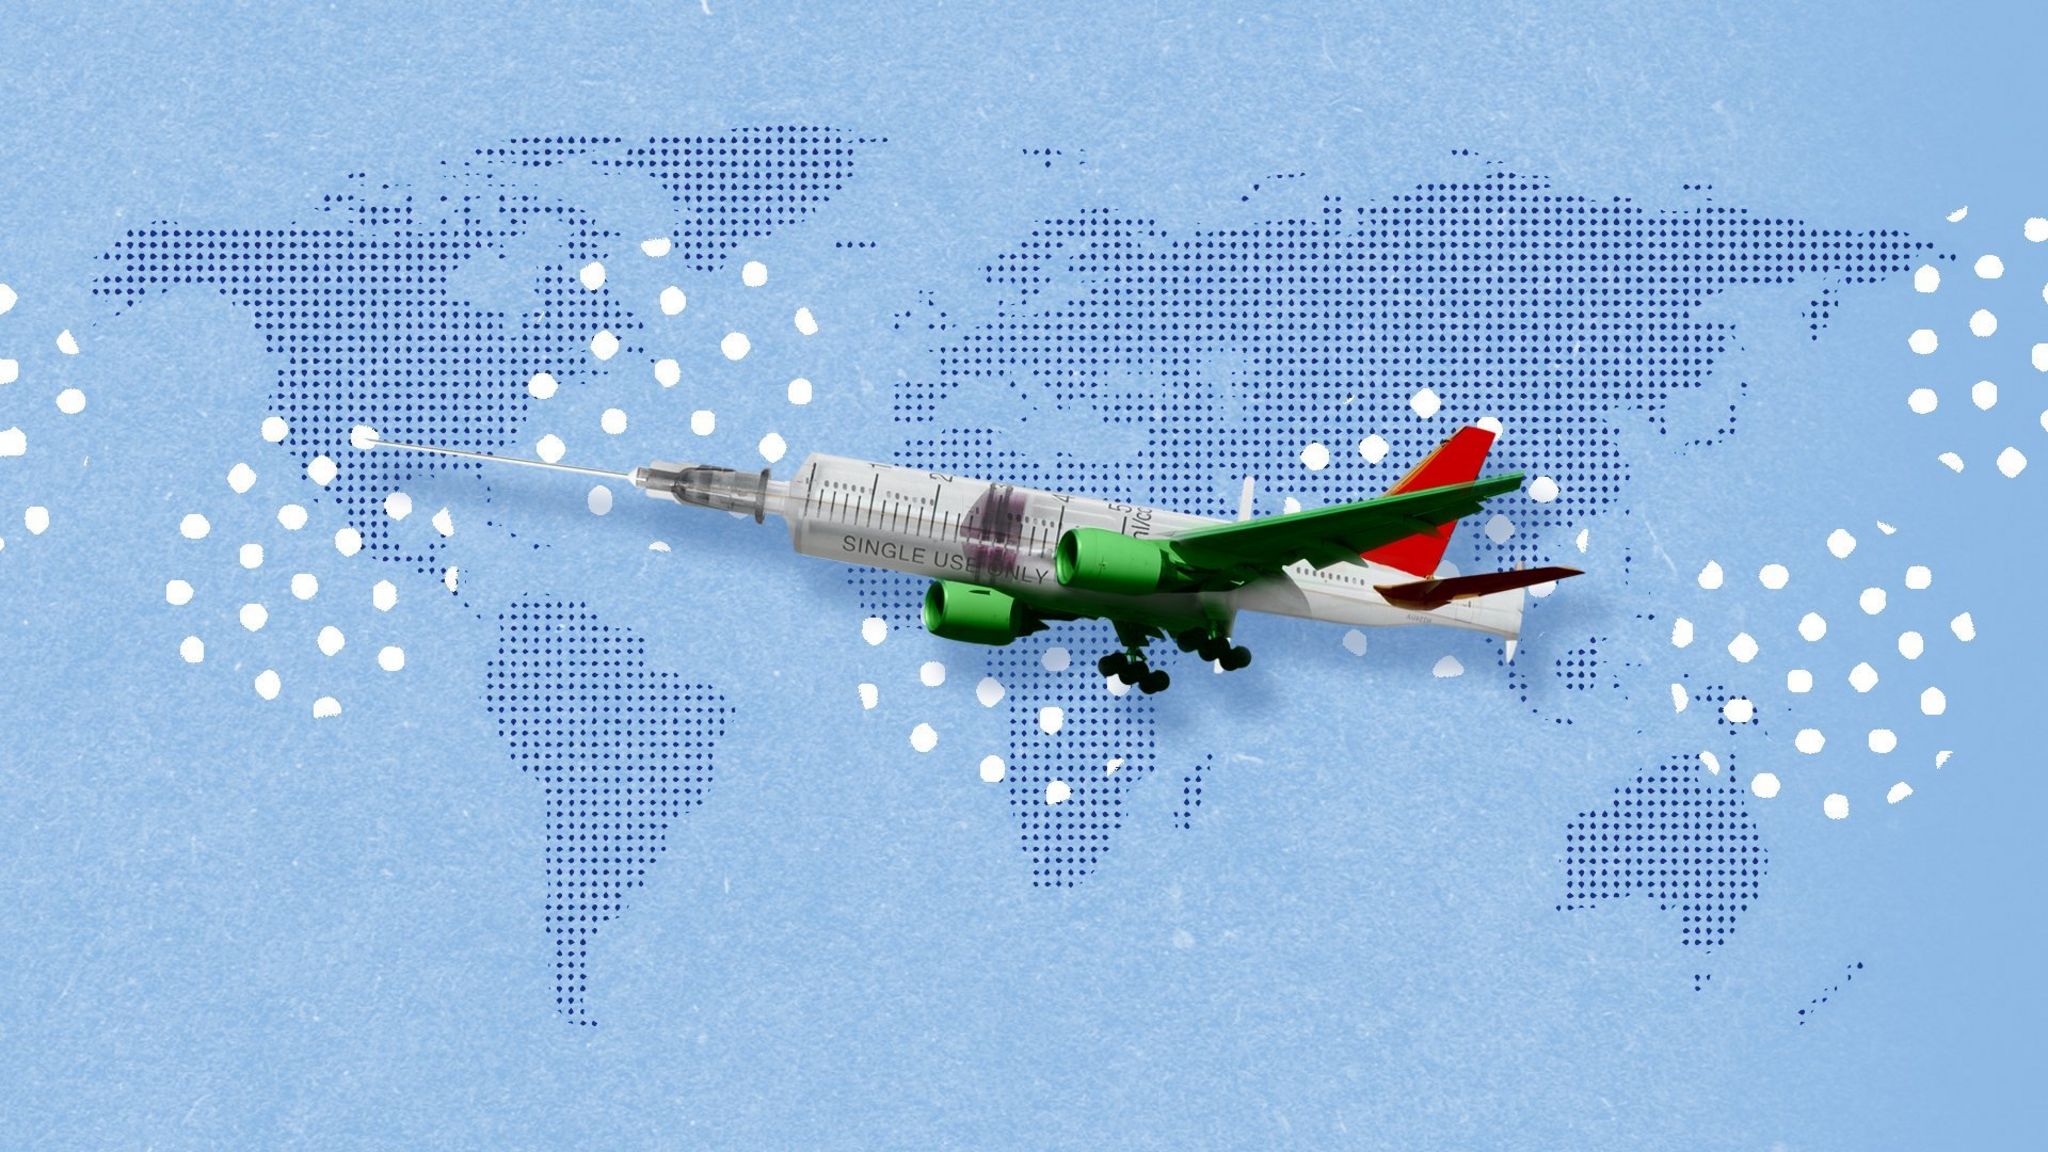 Collage art of an aeroplane that is also a syringe